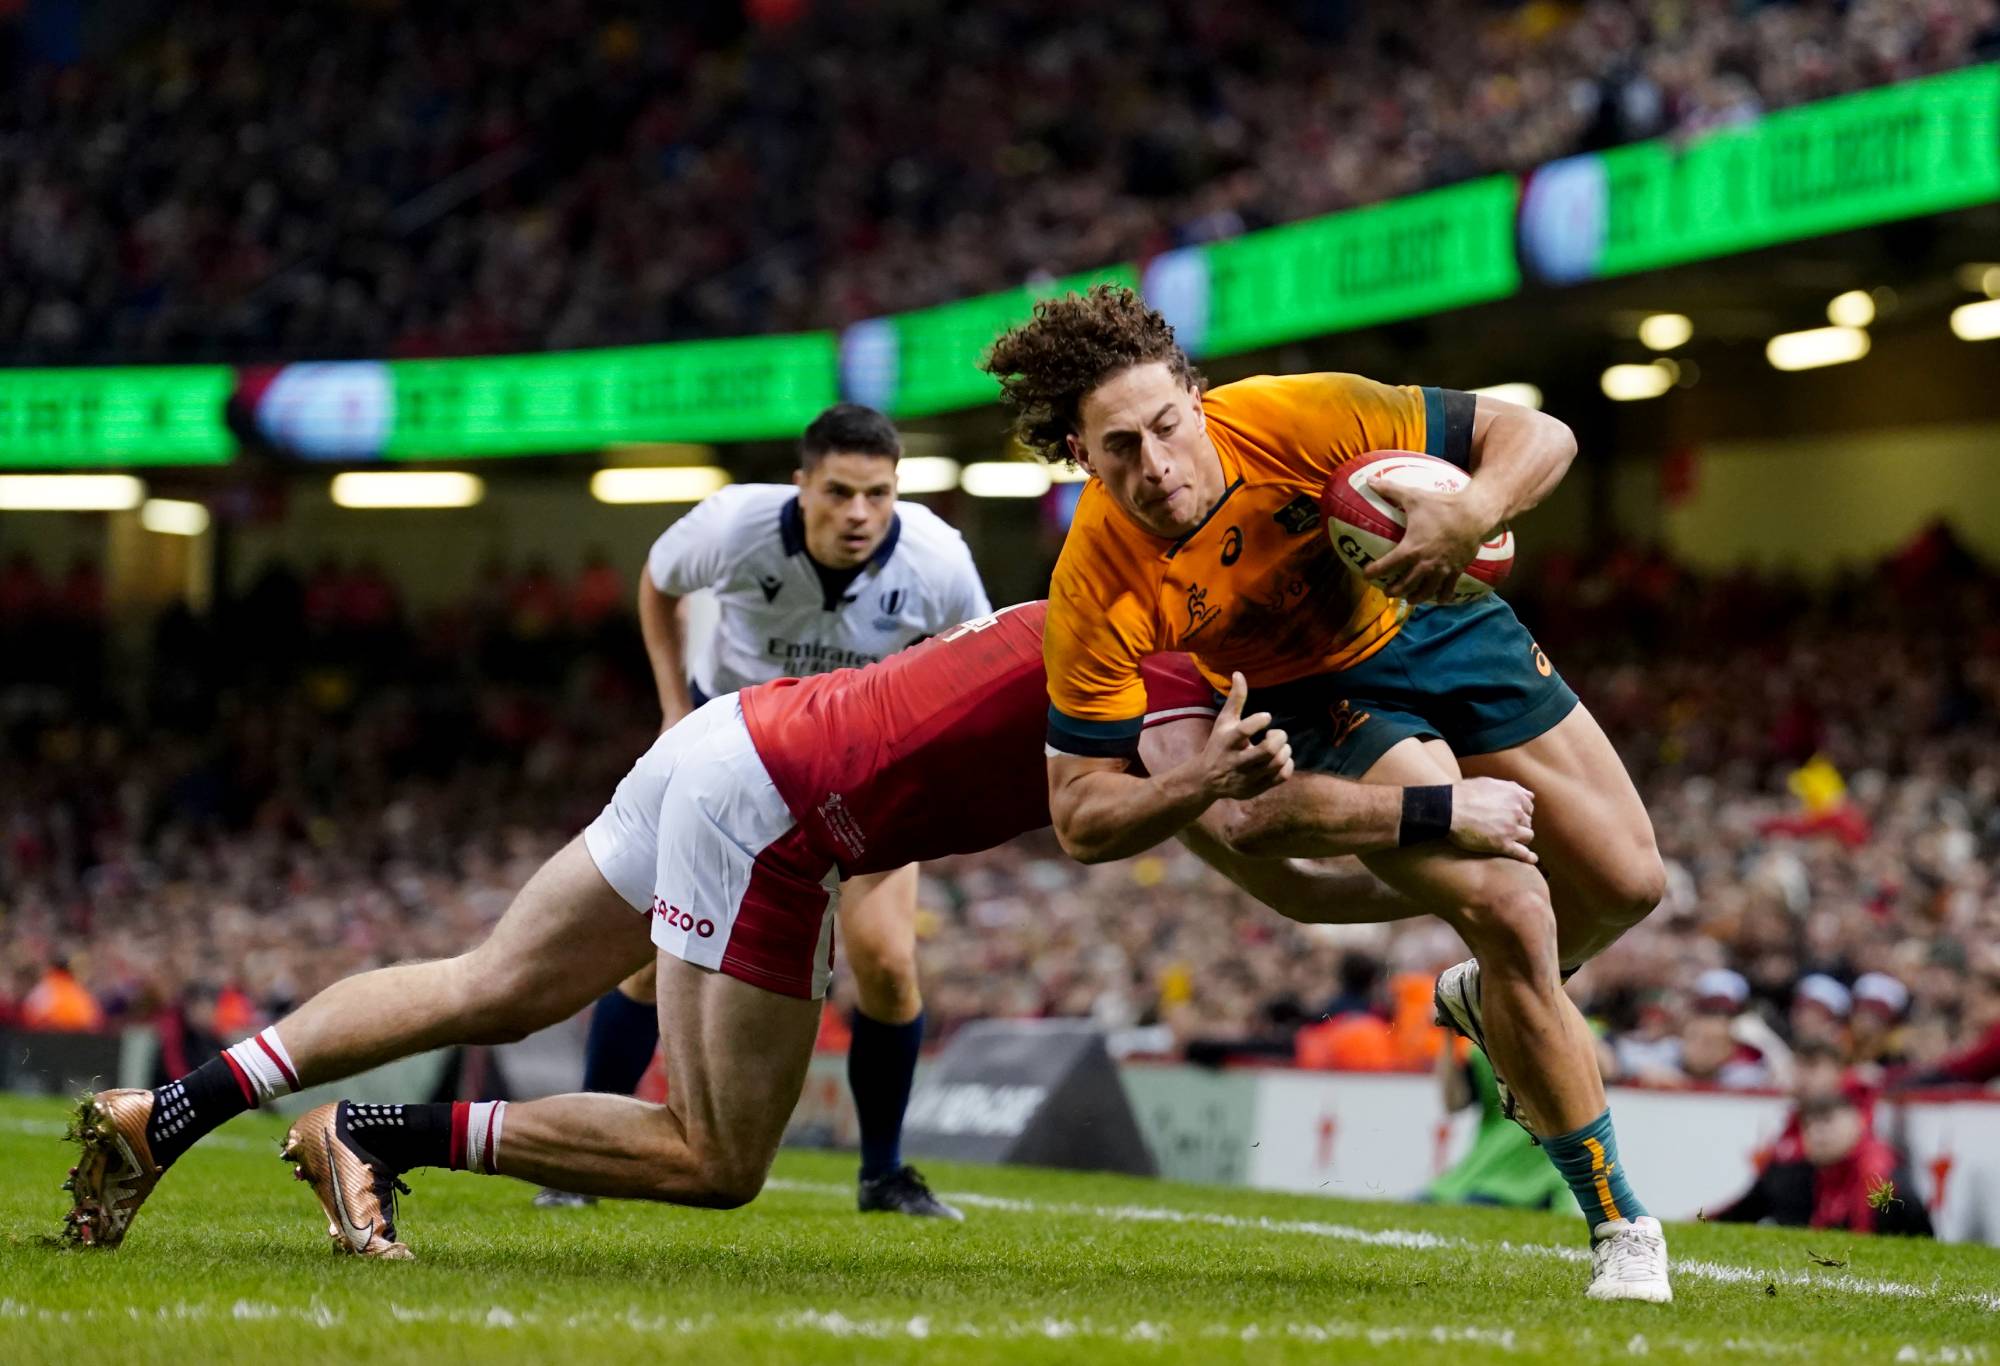 Australia's Mark Nawaqanitawase evades a tackle from Wales' Alex Cuthbert as he runs in to score a try during the Autumn International match at Principality Stadium, Cardiff. Picture date: Saturday November 26, 2022. (Photo by David Davies/PA Images via Getty Images)